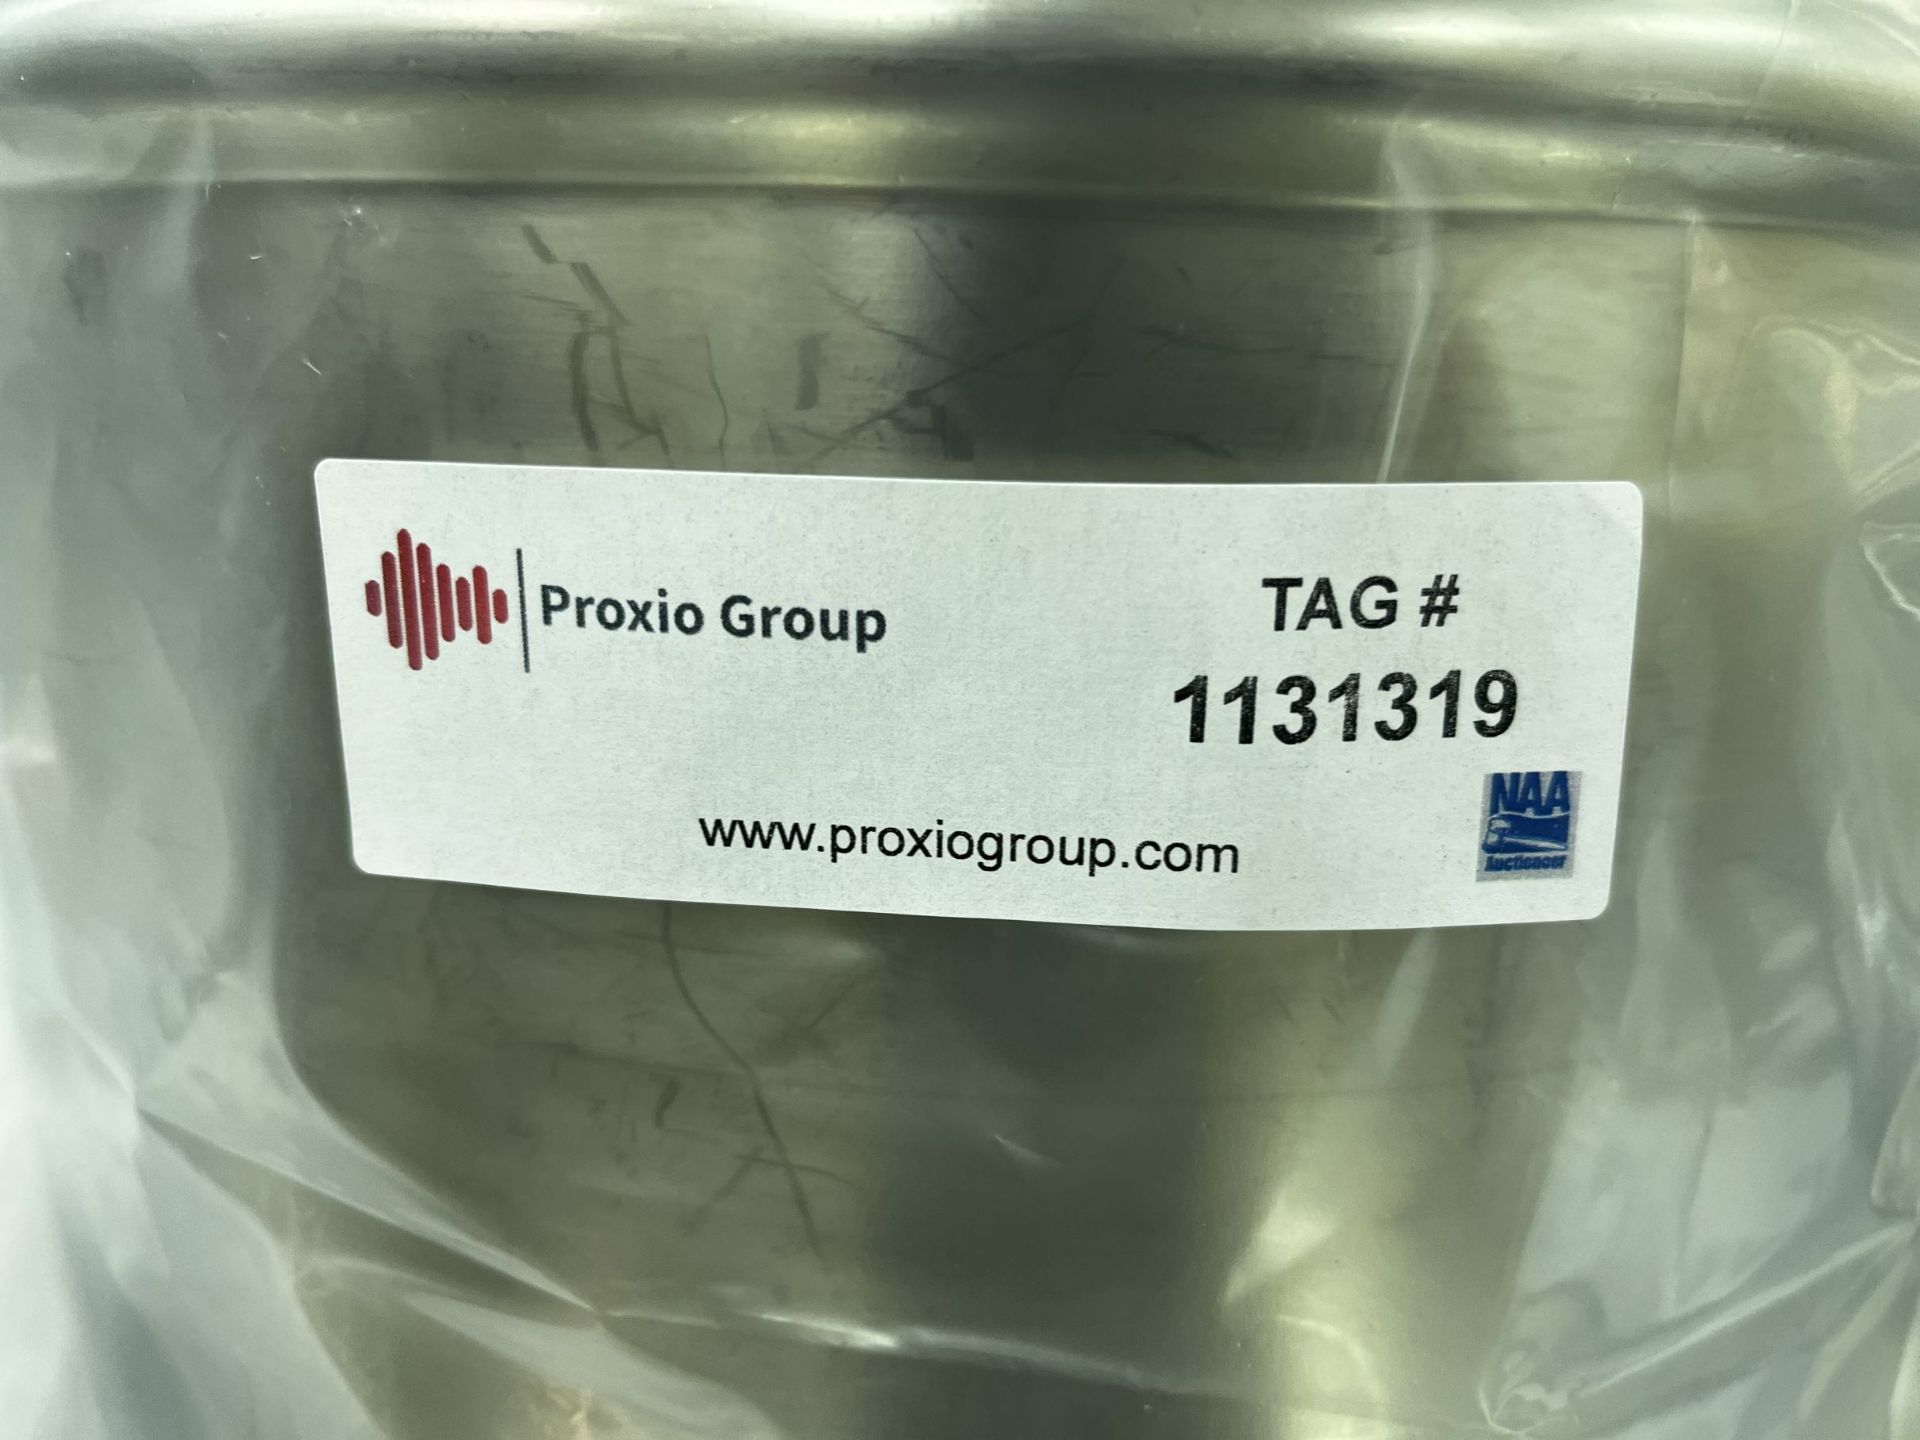 60 Liter Stainless Steel Pot with Lid - Image 4 of 4